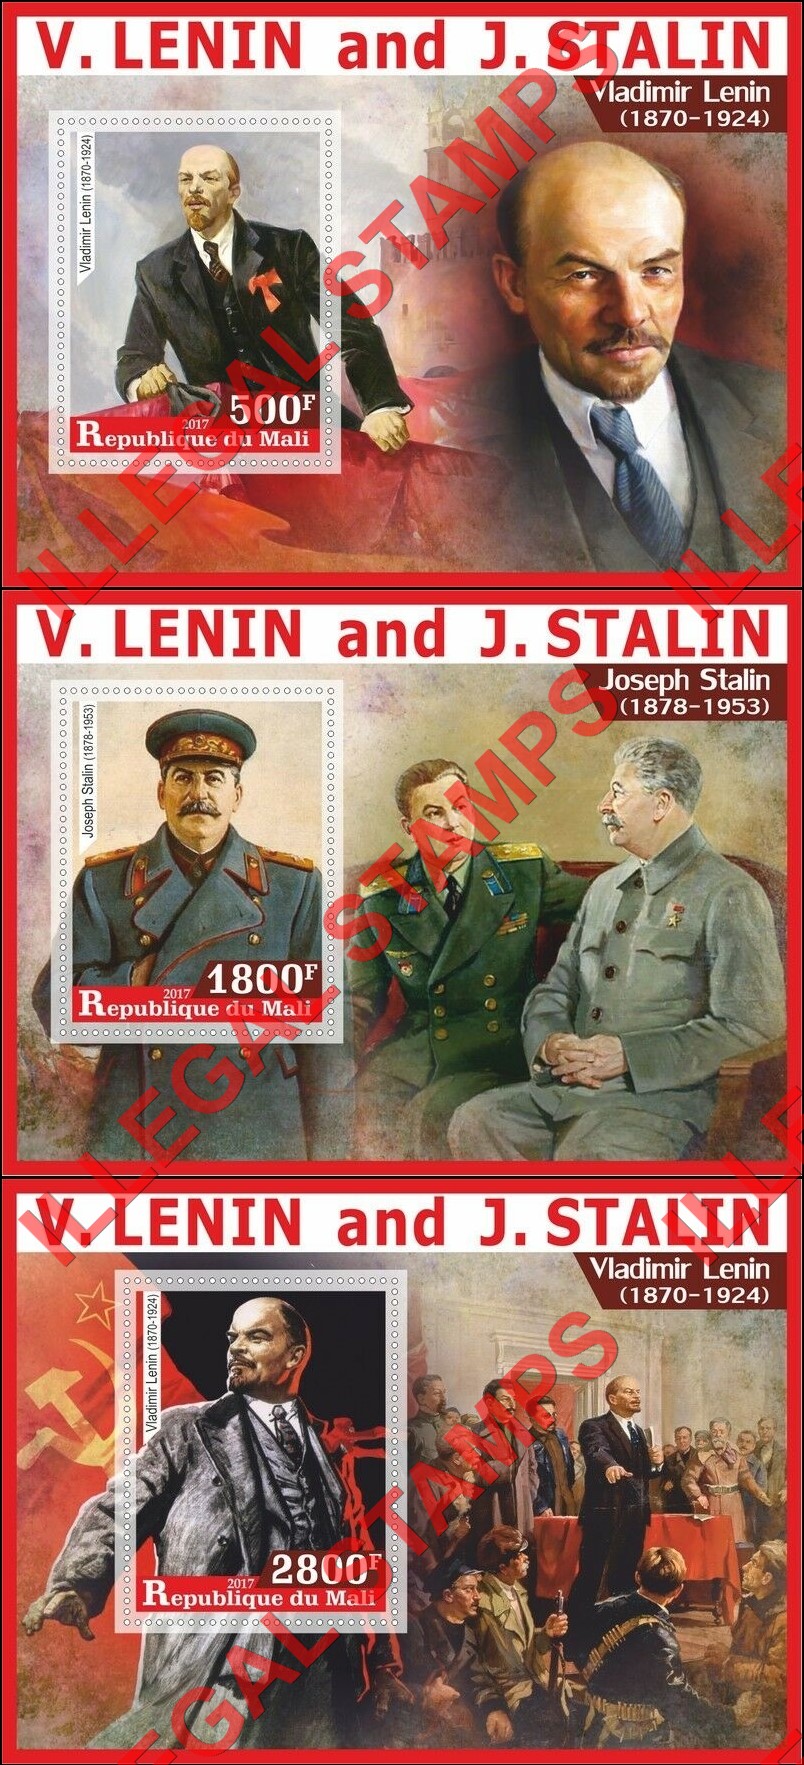 Mali 2017 Lenin and Stalin Illegal Stamp Souvenir Sheets of 1 (Part 2)